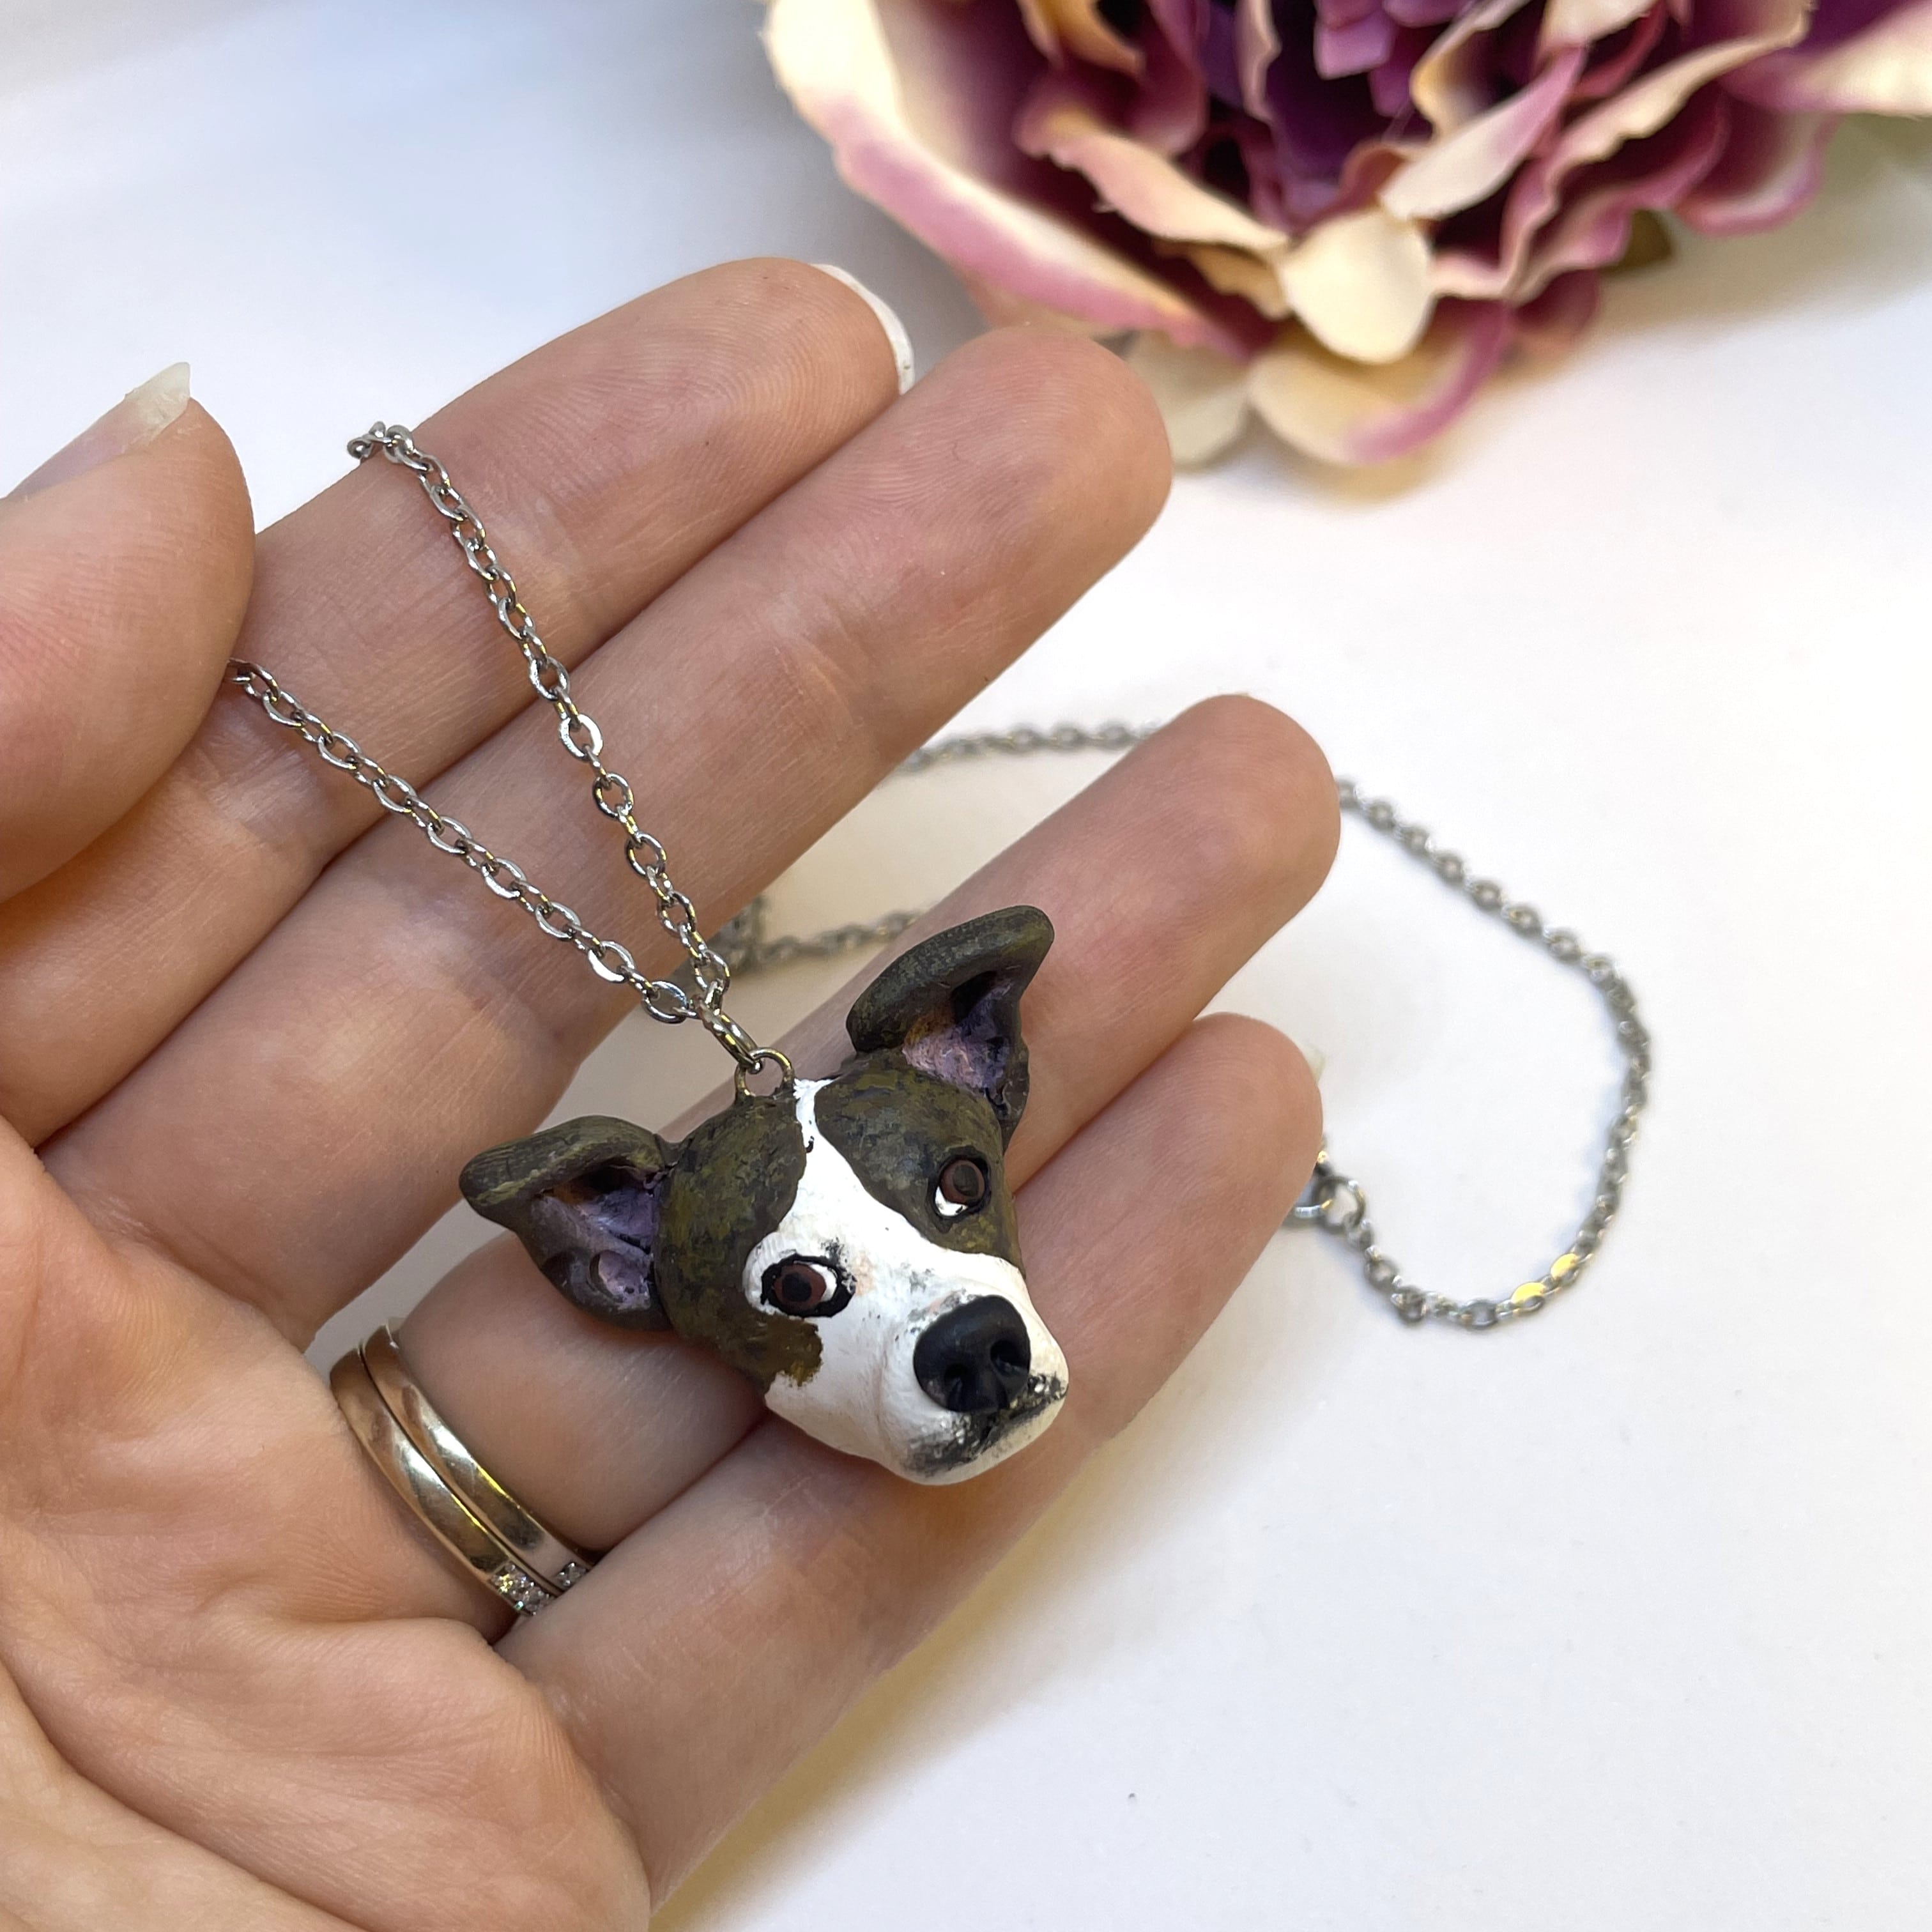 Personalized Gift Custom Pet Name and Image Necklace Pendant Jewelry Family  Cat | eBay